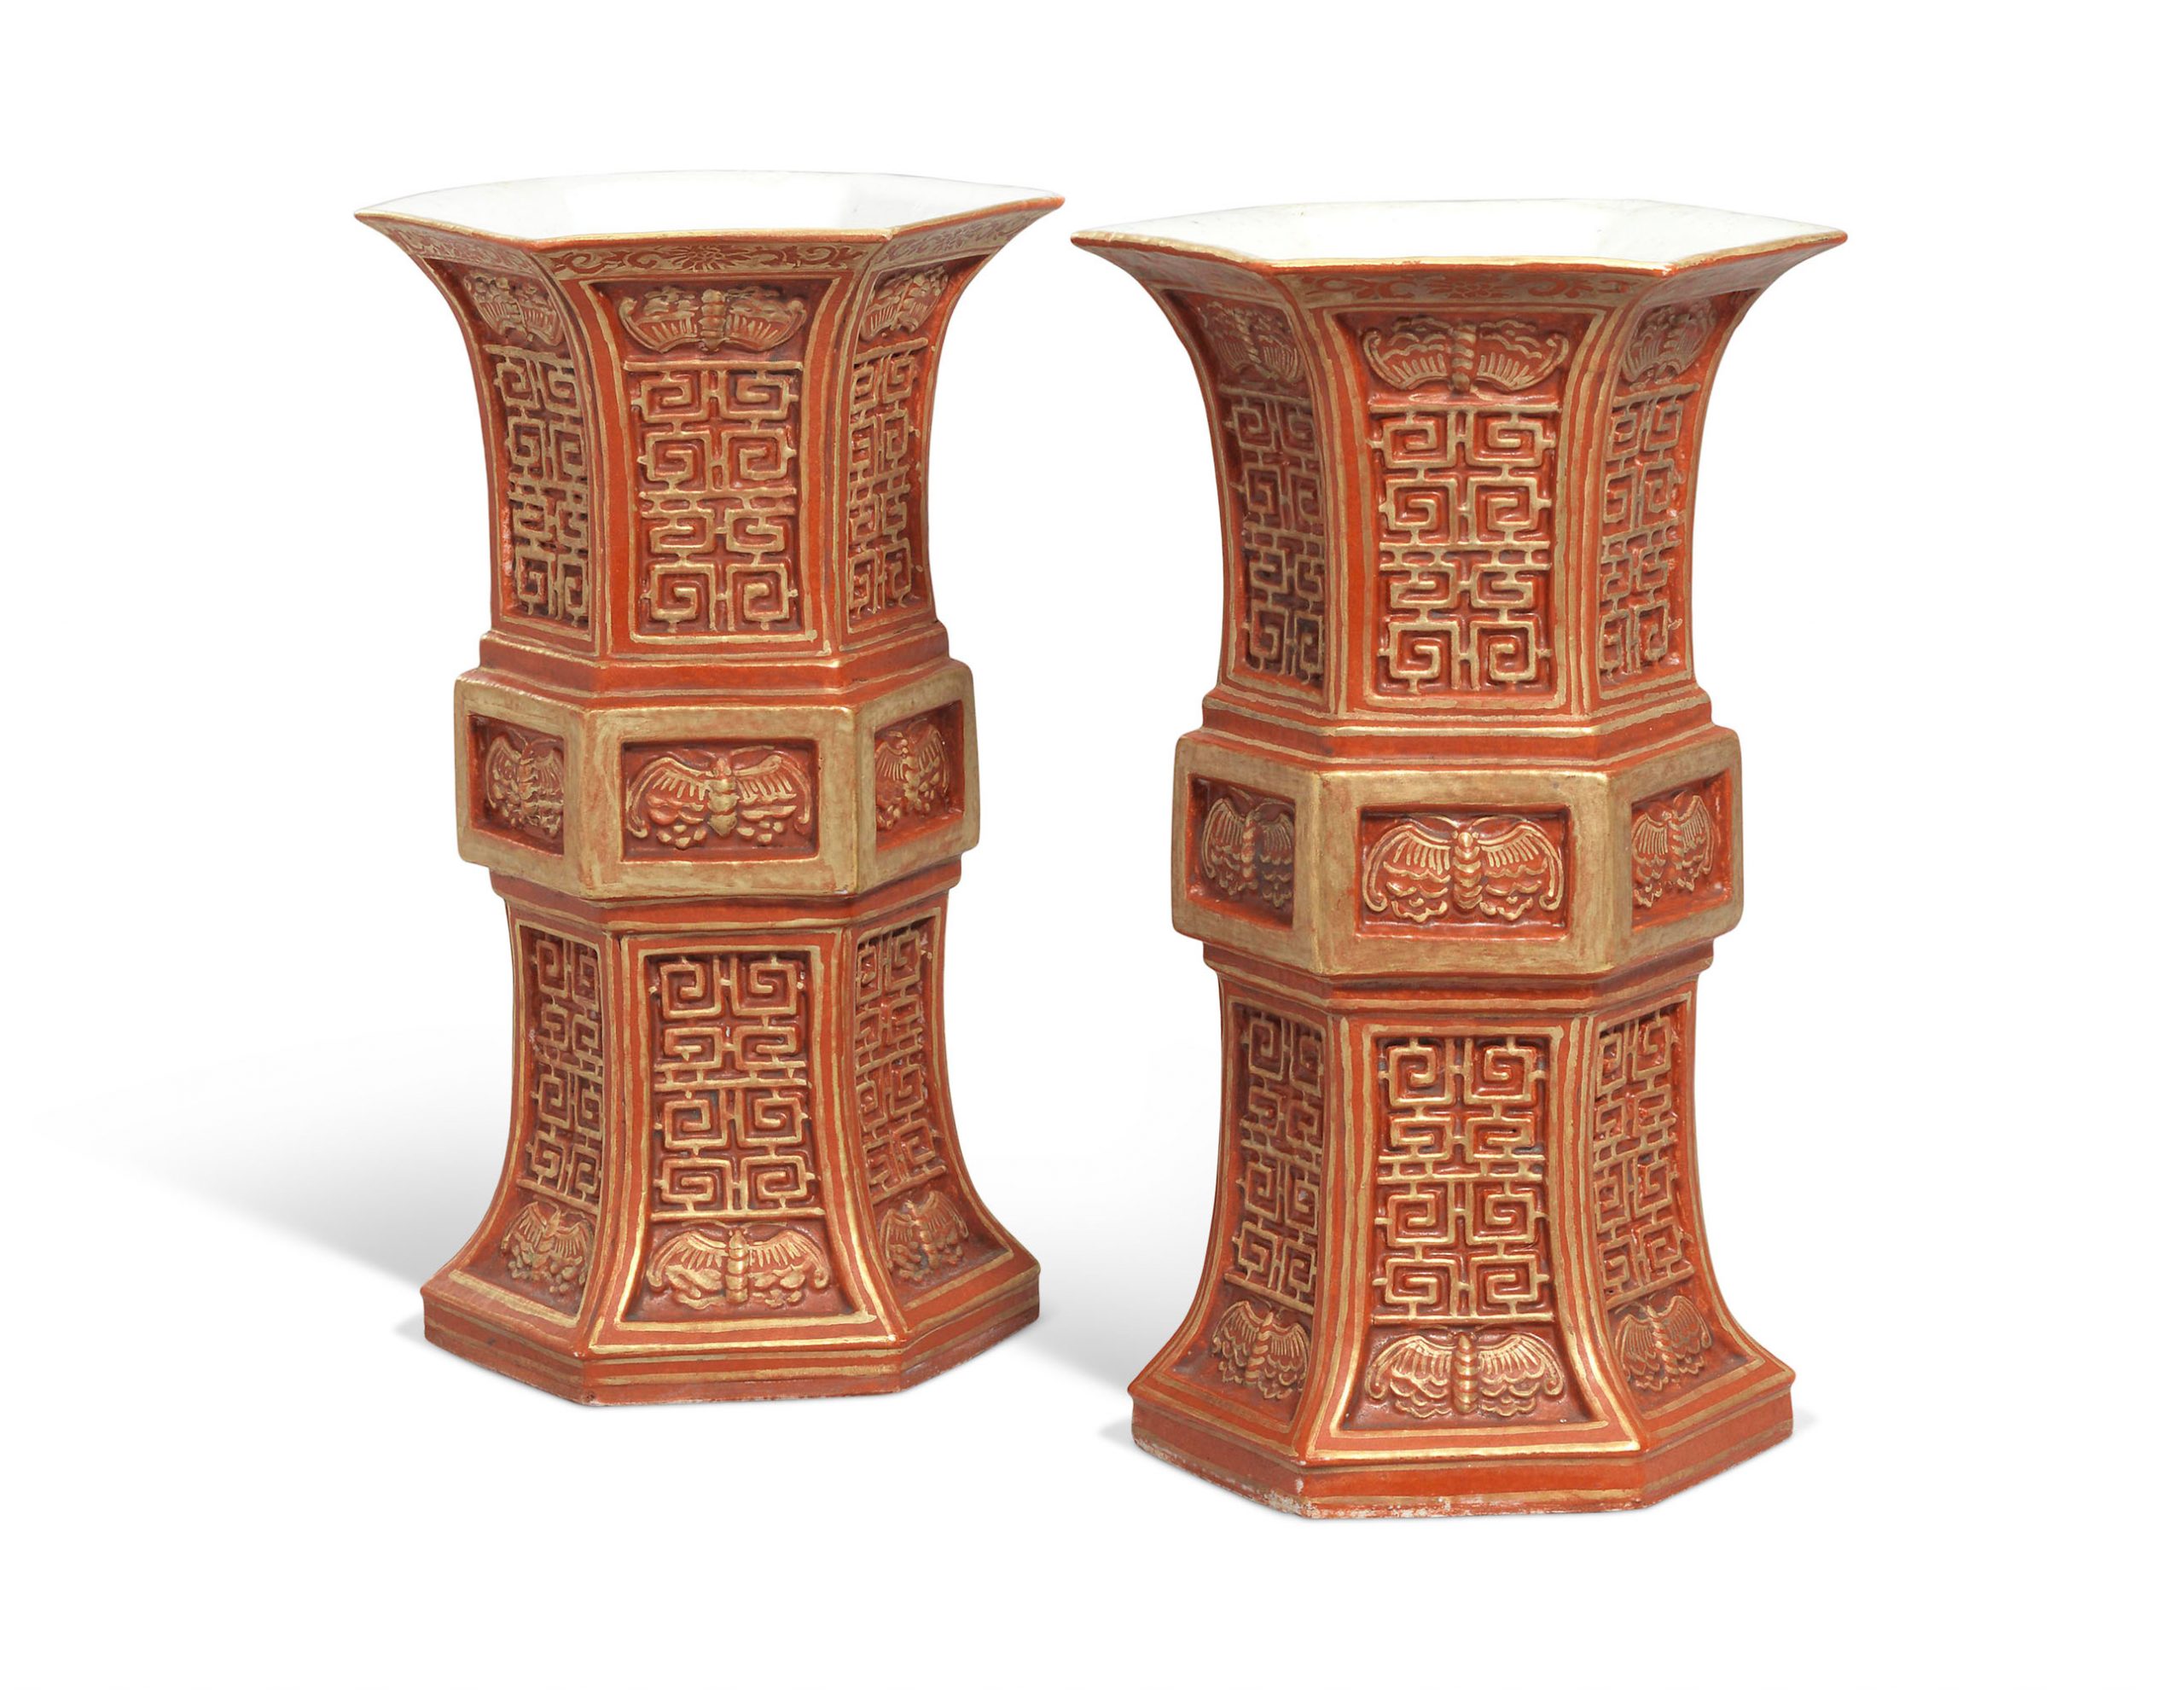 A PAIR OF CORAL-GROUND AND GILT-DECORATED HEXAGONAL VASES